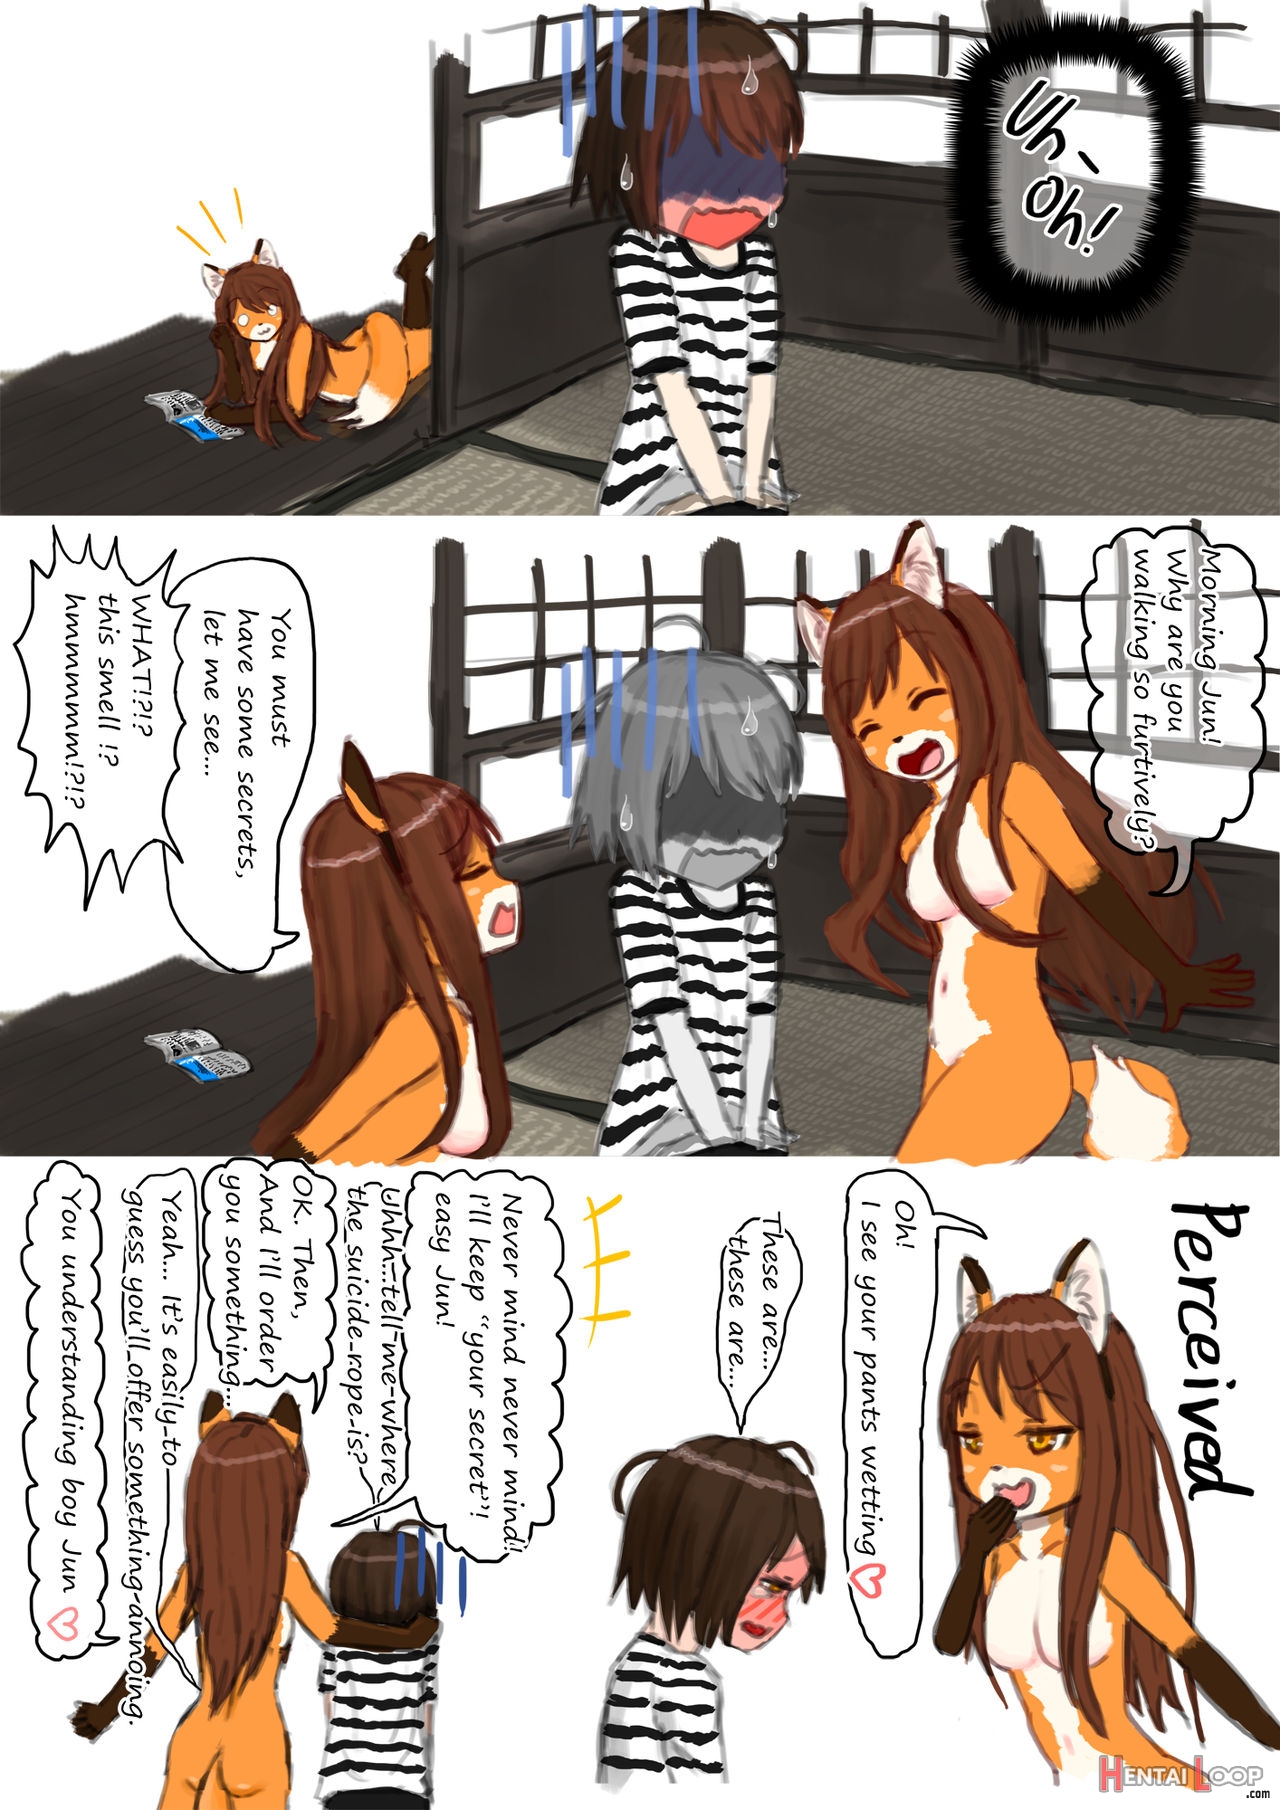 Moved To A Country Side, Became A Salacious Raccoon. page 14